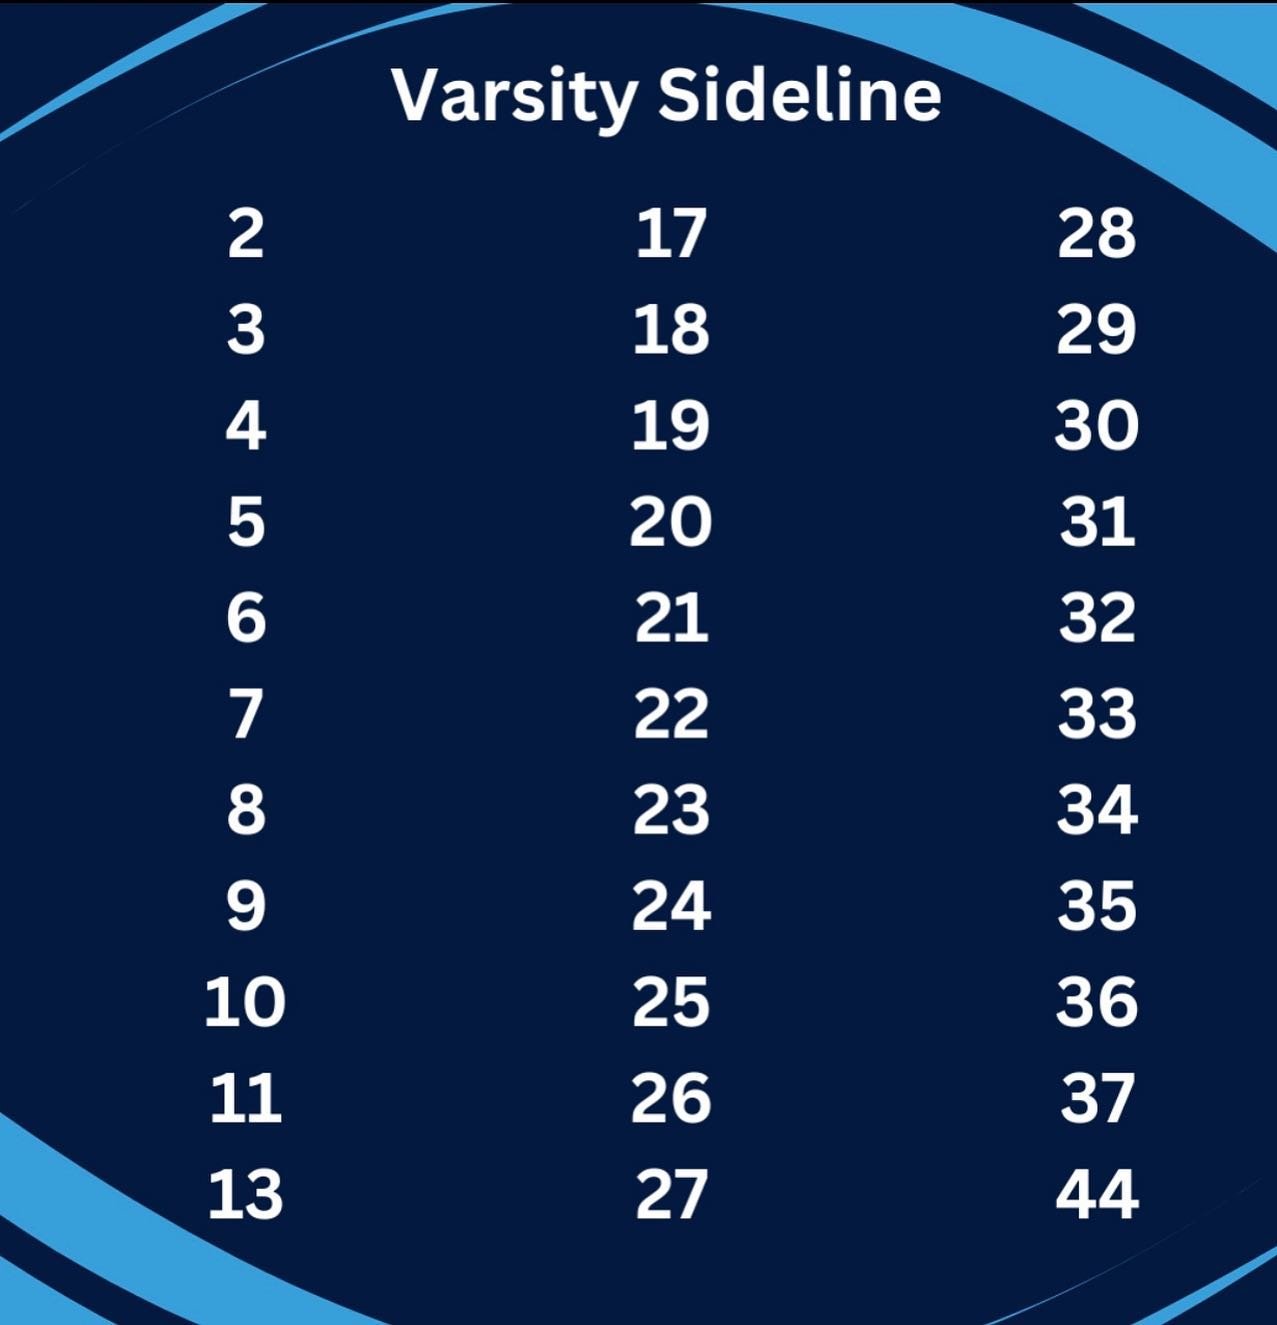 Congratulations to all our athletes that made our varsity 24/25 team. Please see additional information on our website.